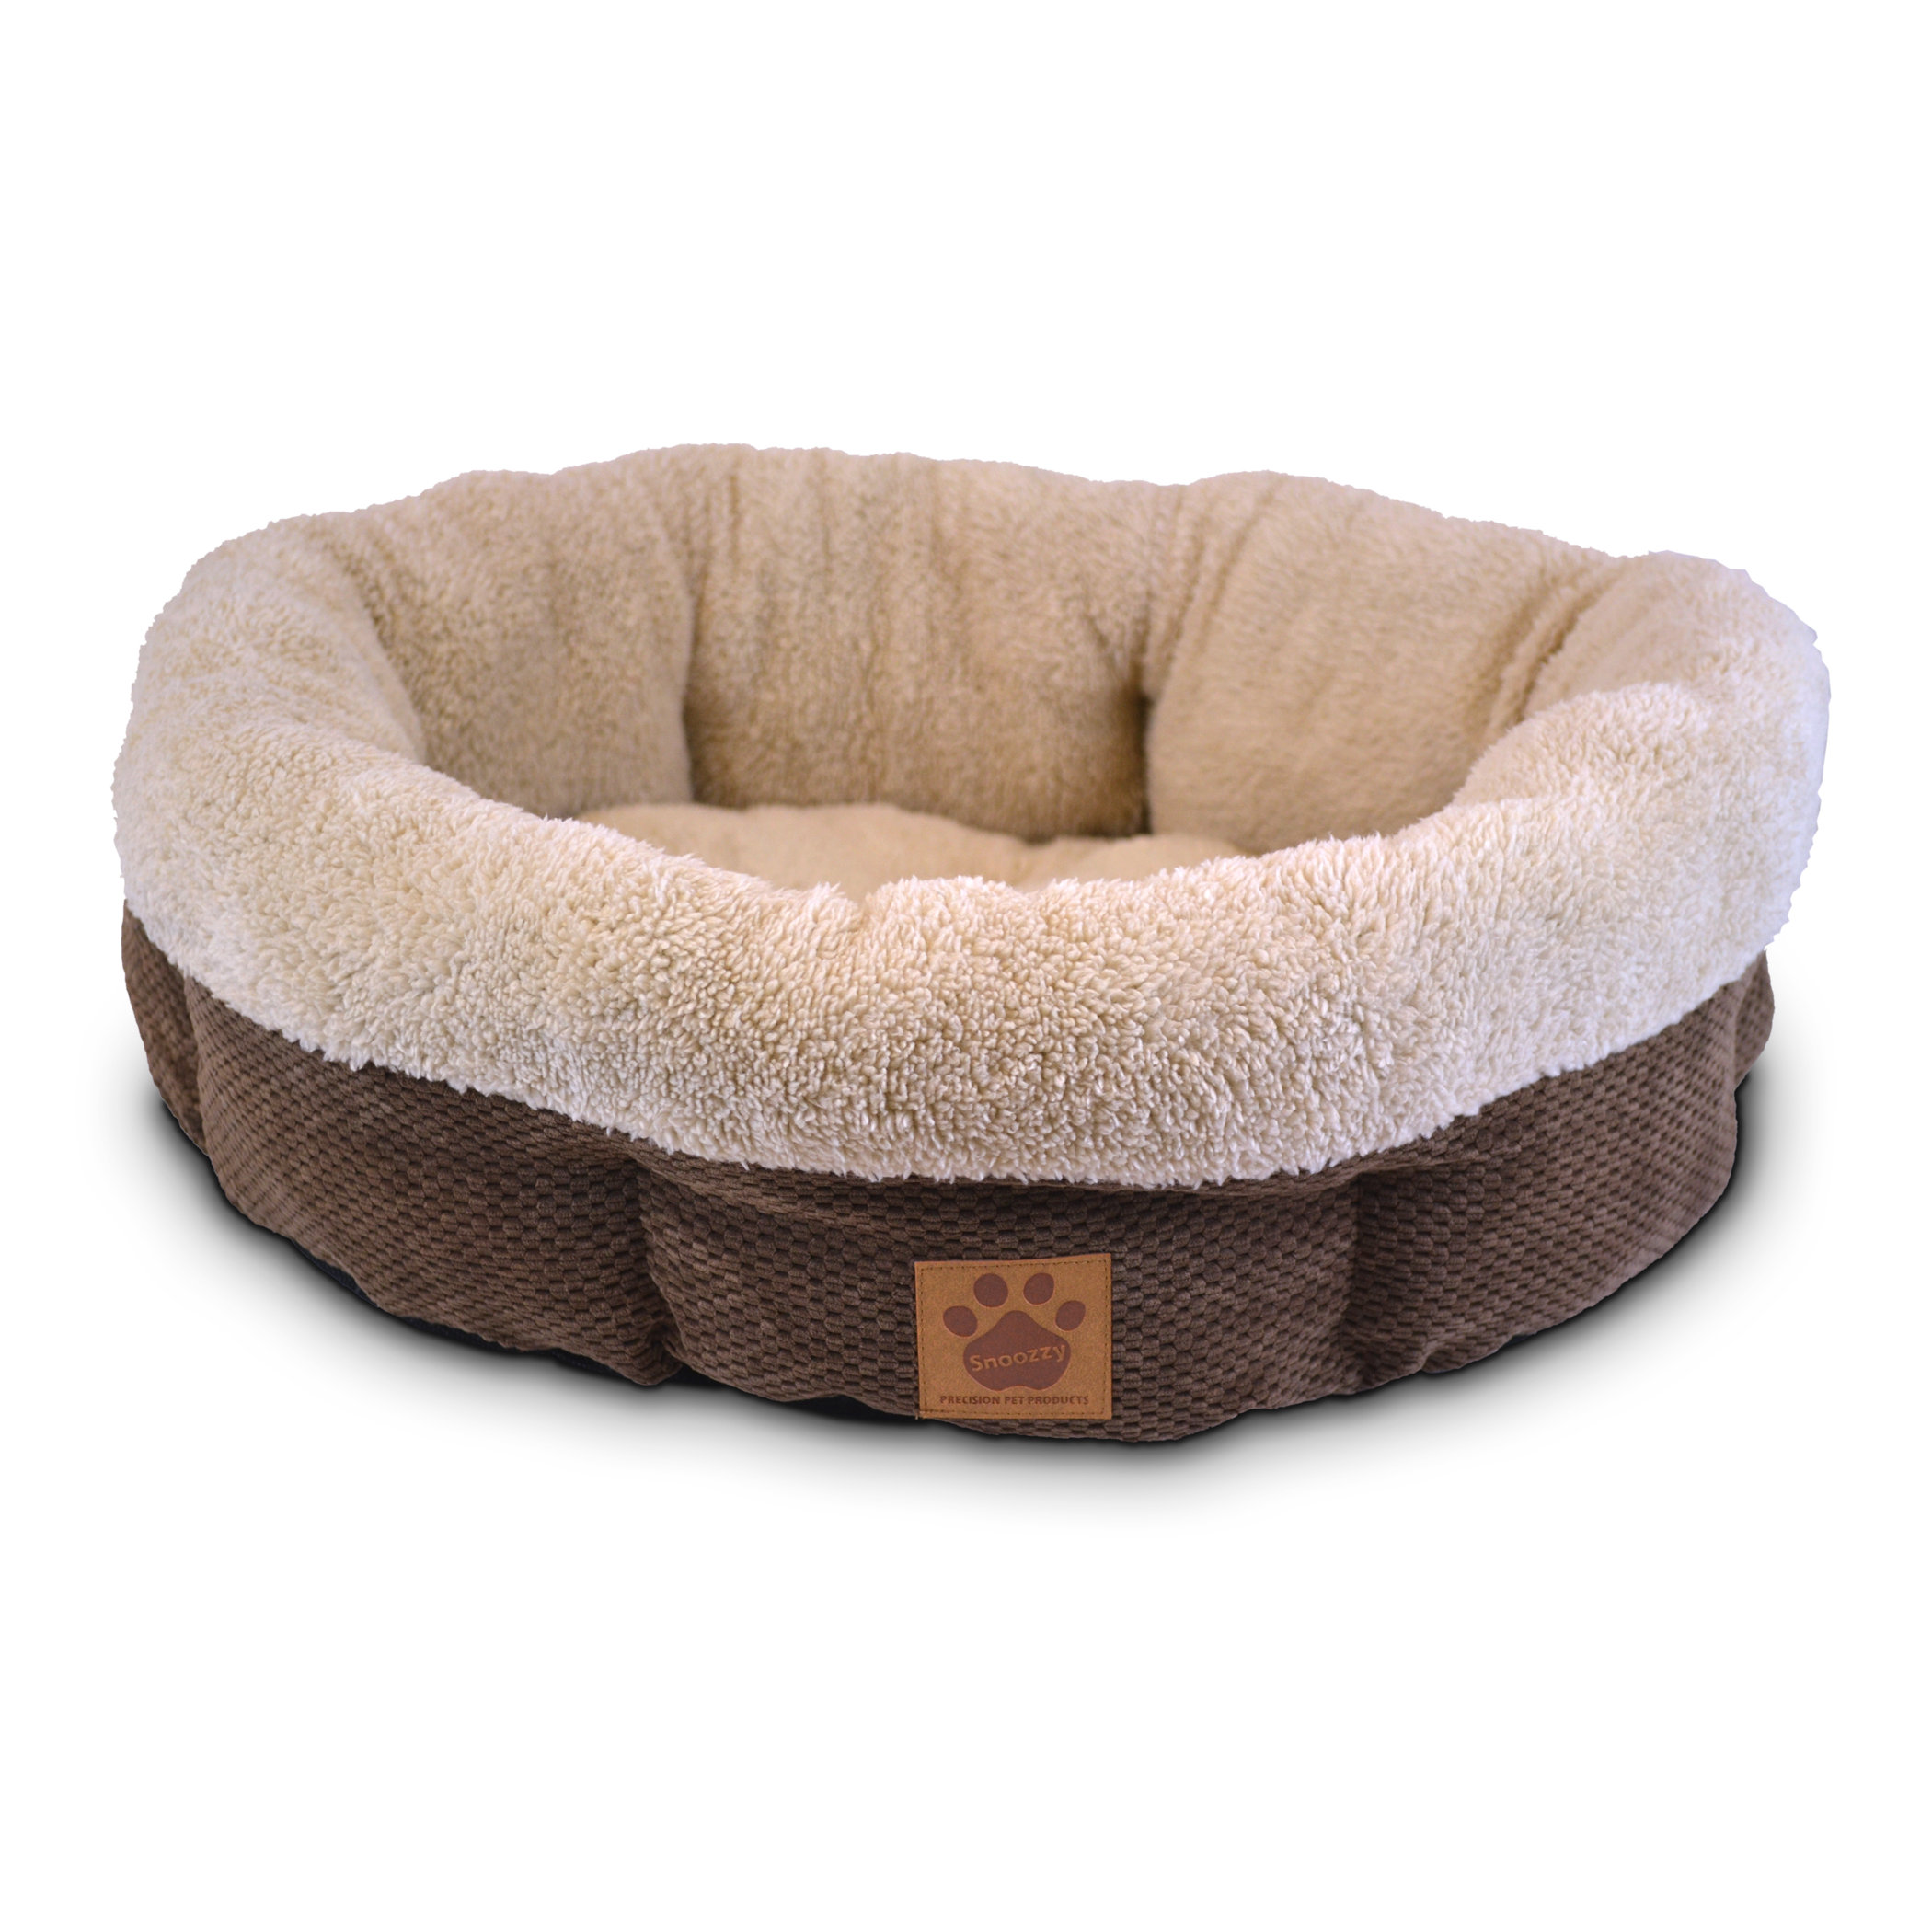 Precision Pet Products Natural Surroundings Shearling Dog Bed 2564 75617 